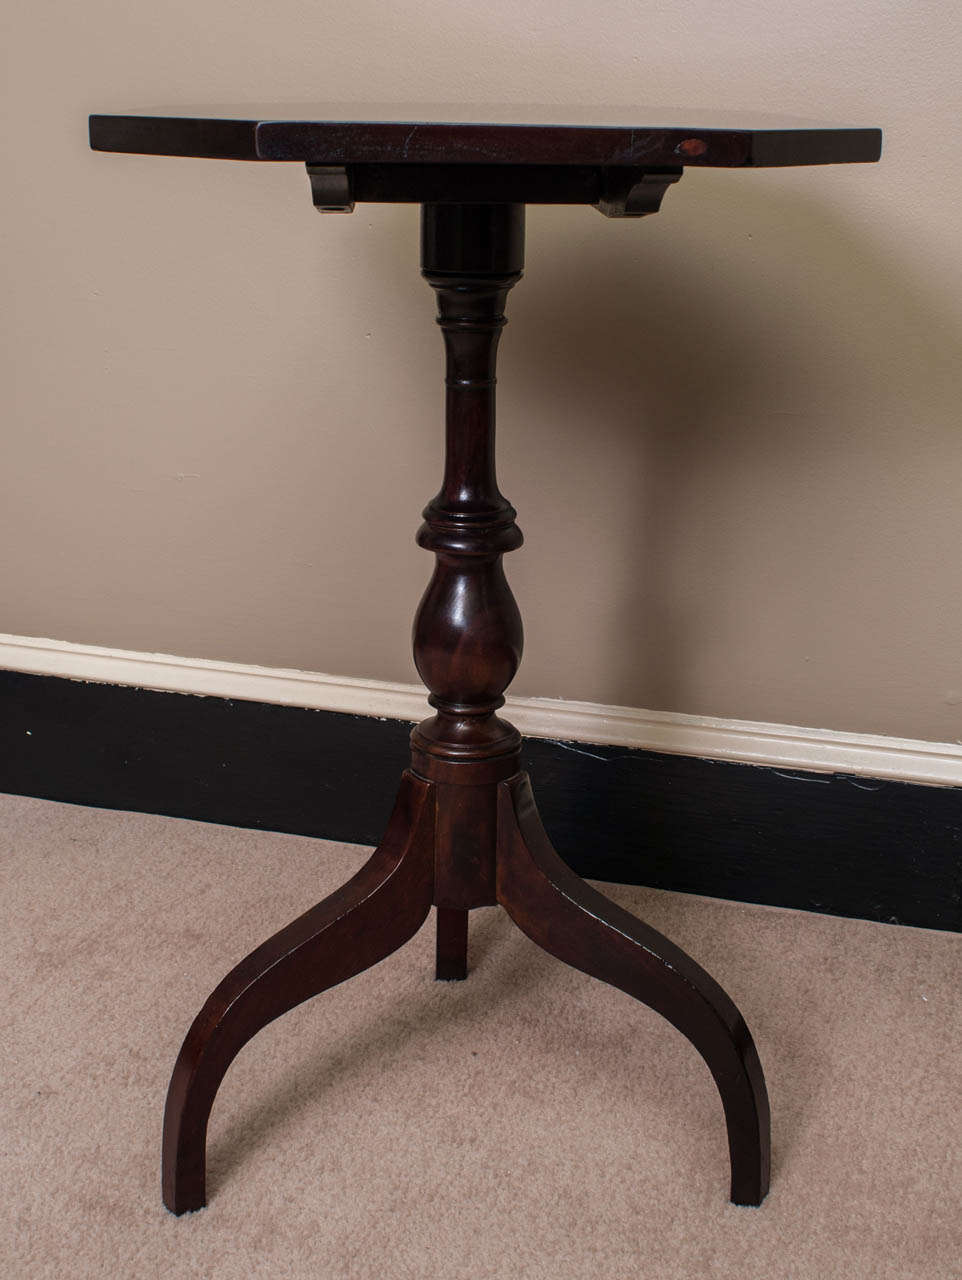 This stand was probably made in the coastal South, the turning of the pedestal and the proportions of the cyma curve legs all point to a cabinet maker from Norfolk or further South. The table was, at some point, from Mt. Mourne Plantation, Iredel